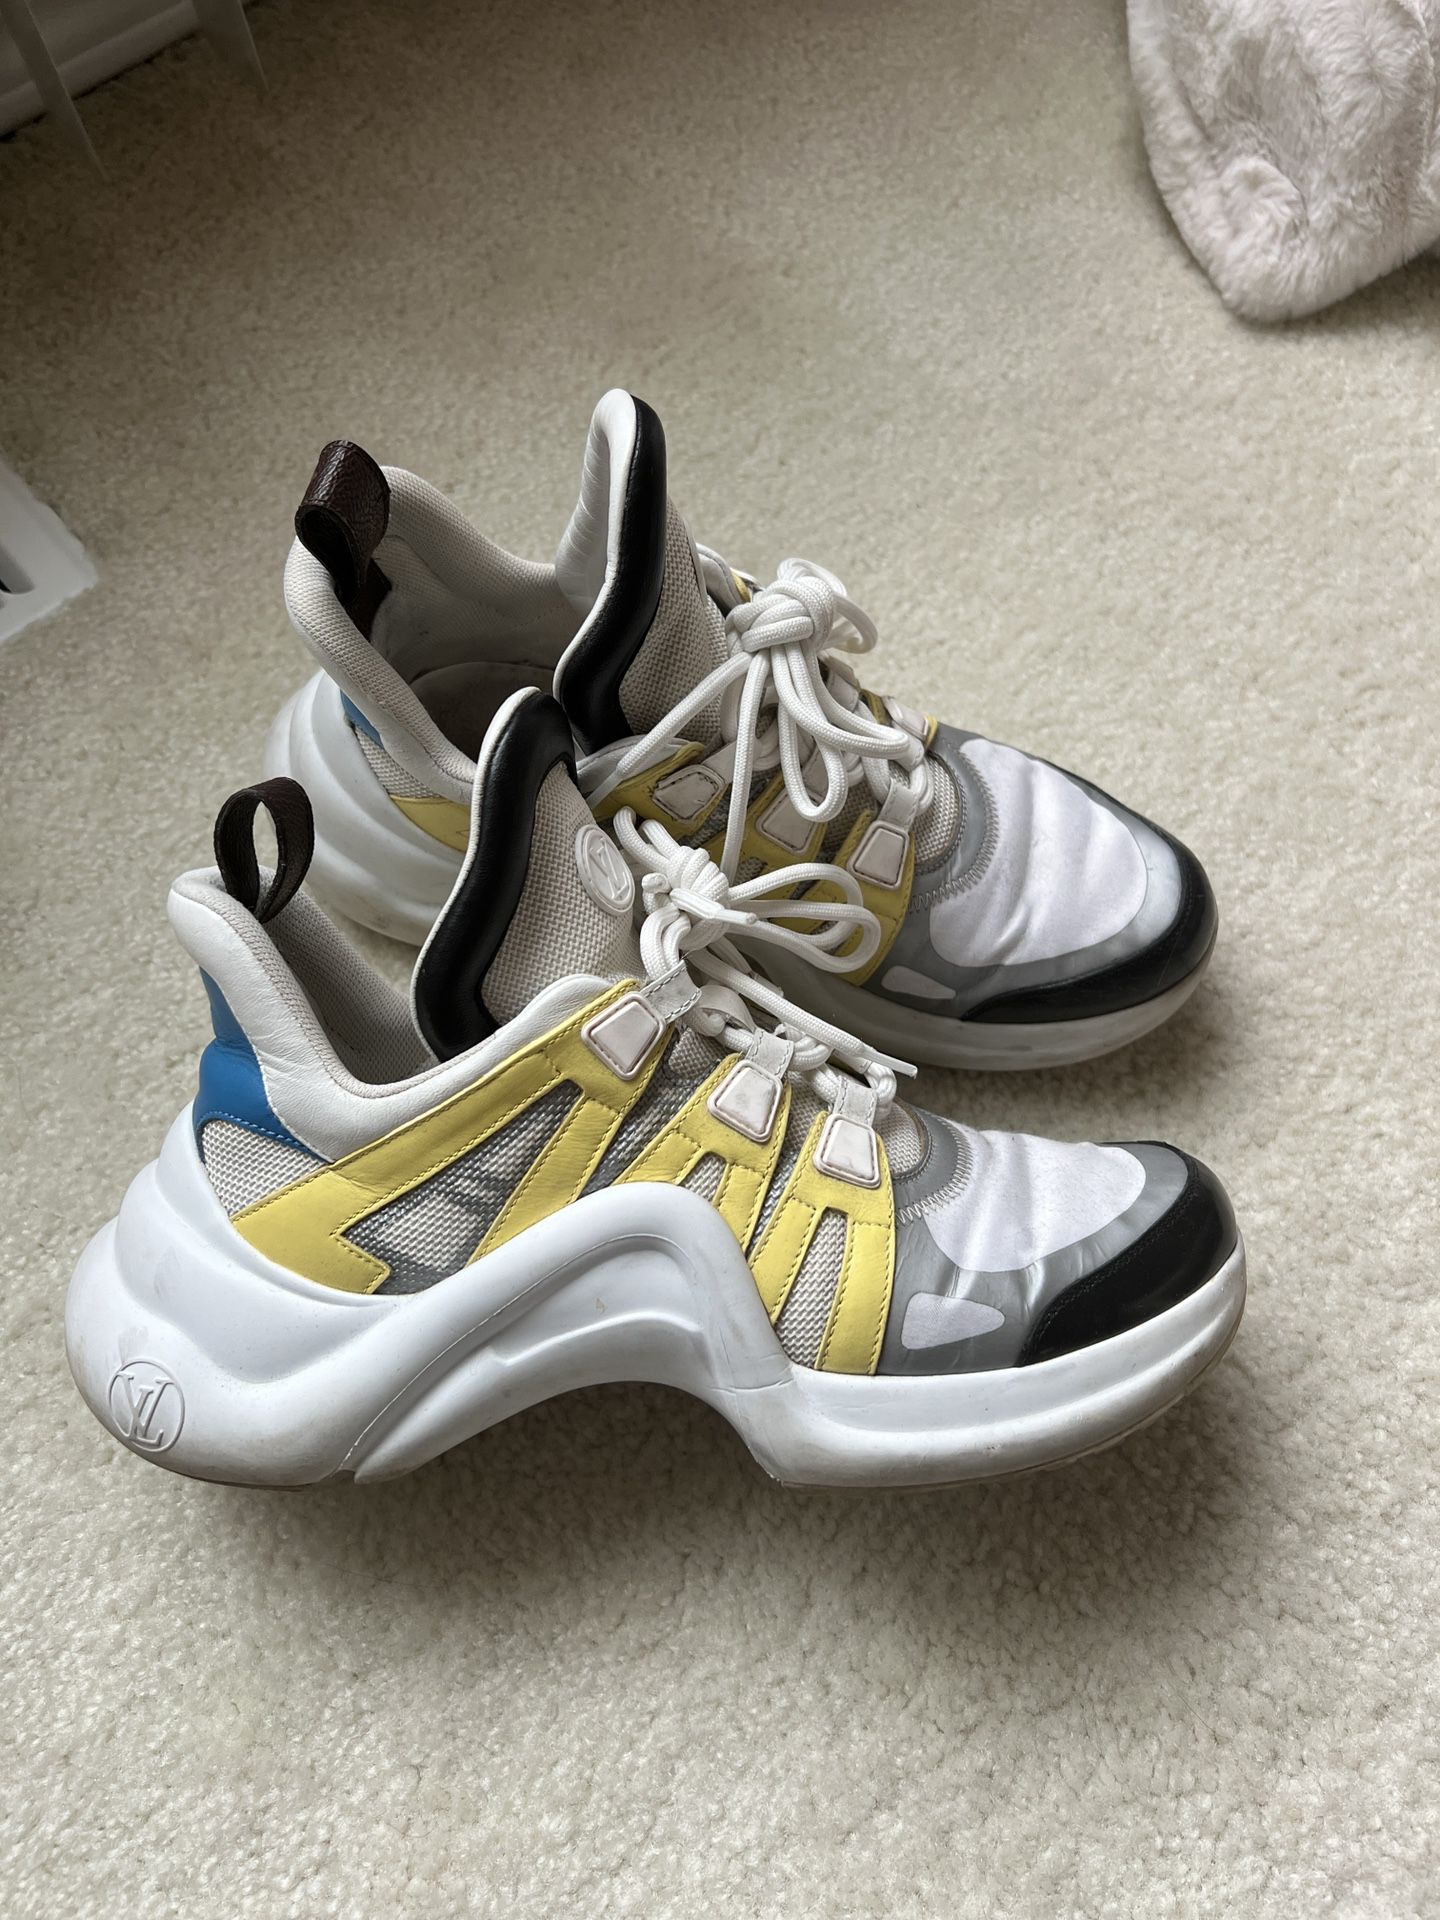 How To Style Louis Vuitton Archlight Sneakers 